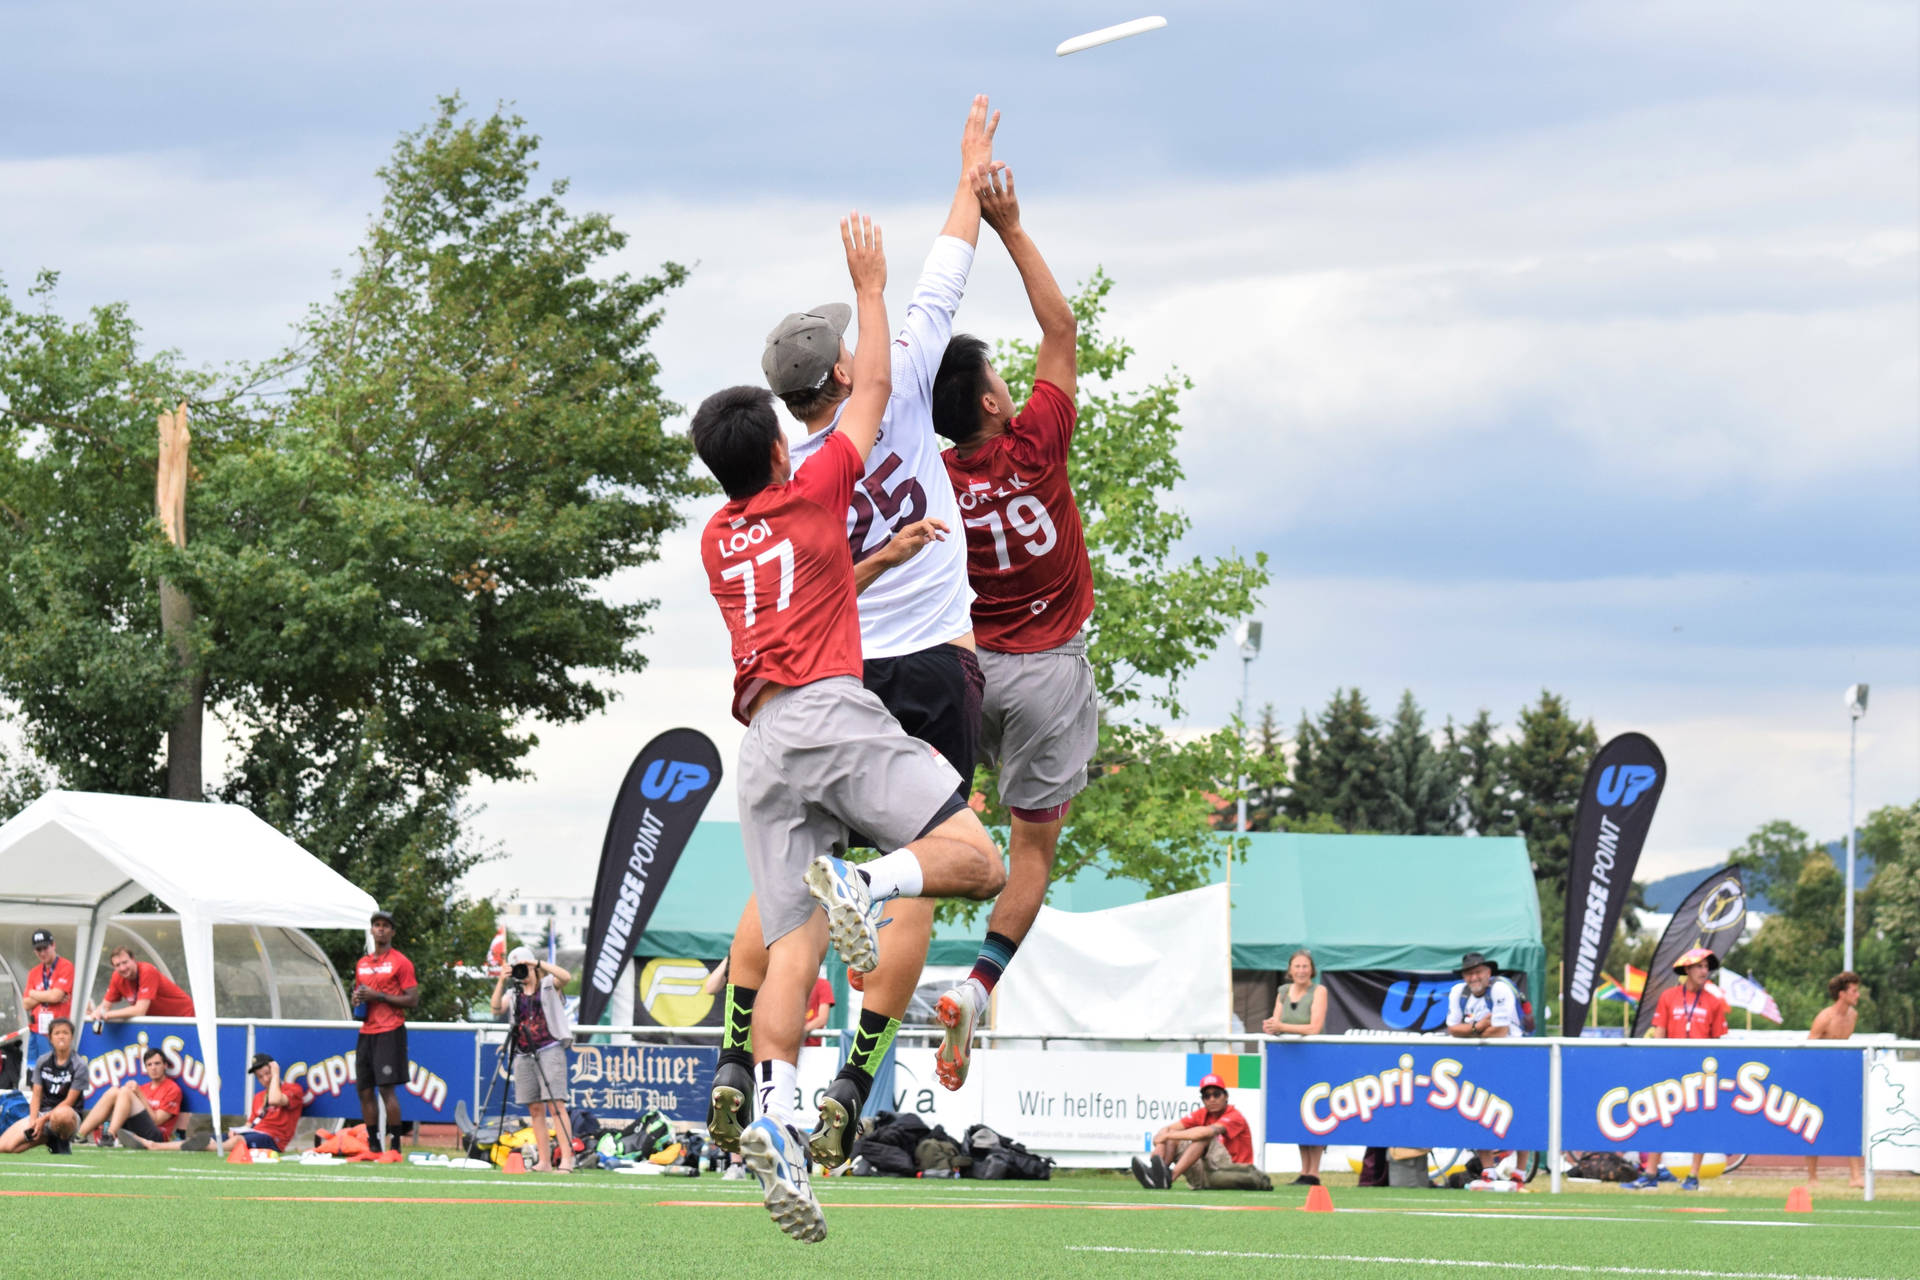 Ultimate Frisbee 5064X3375 Wallpaper and Background Image